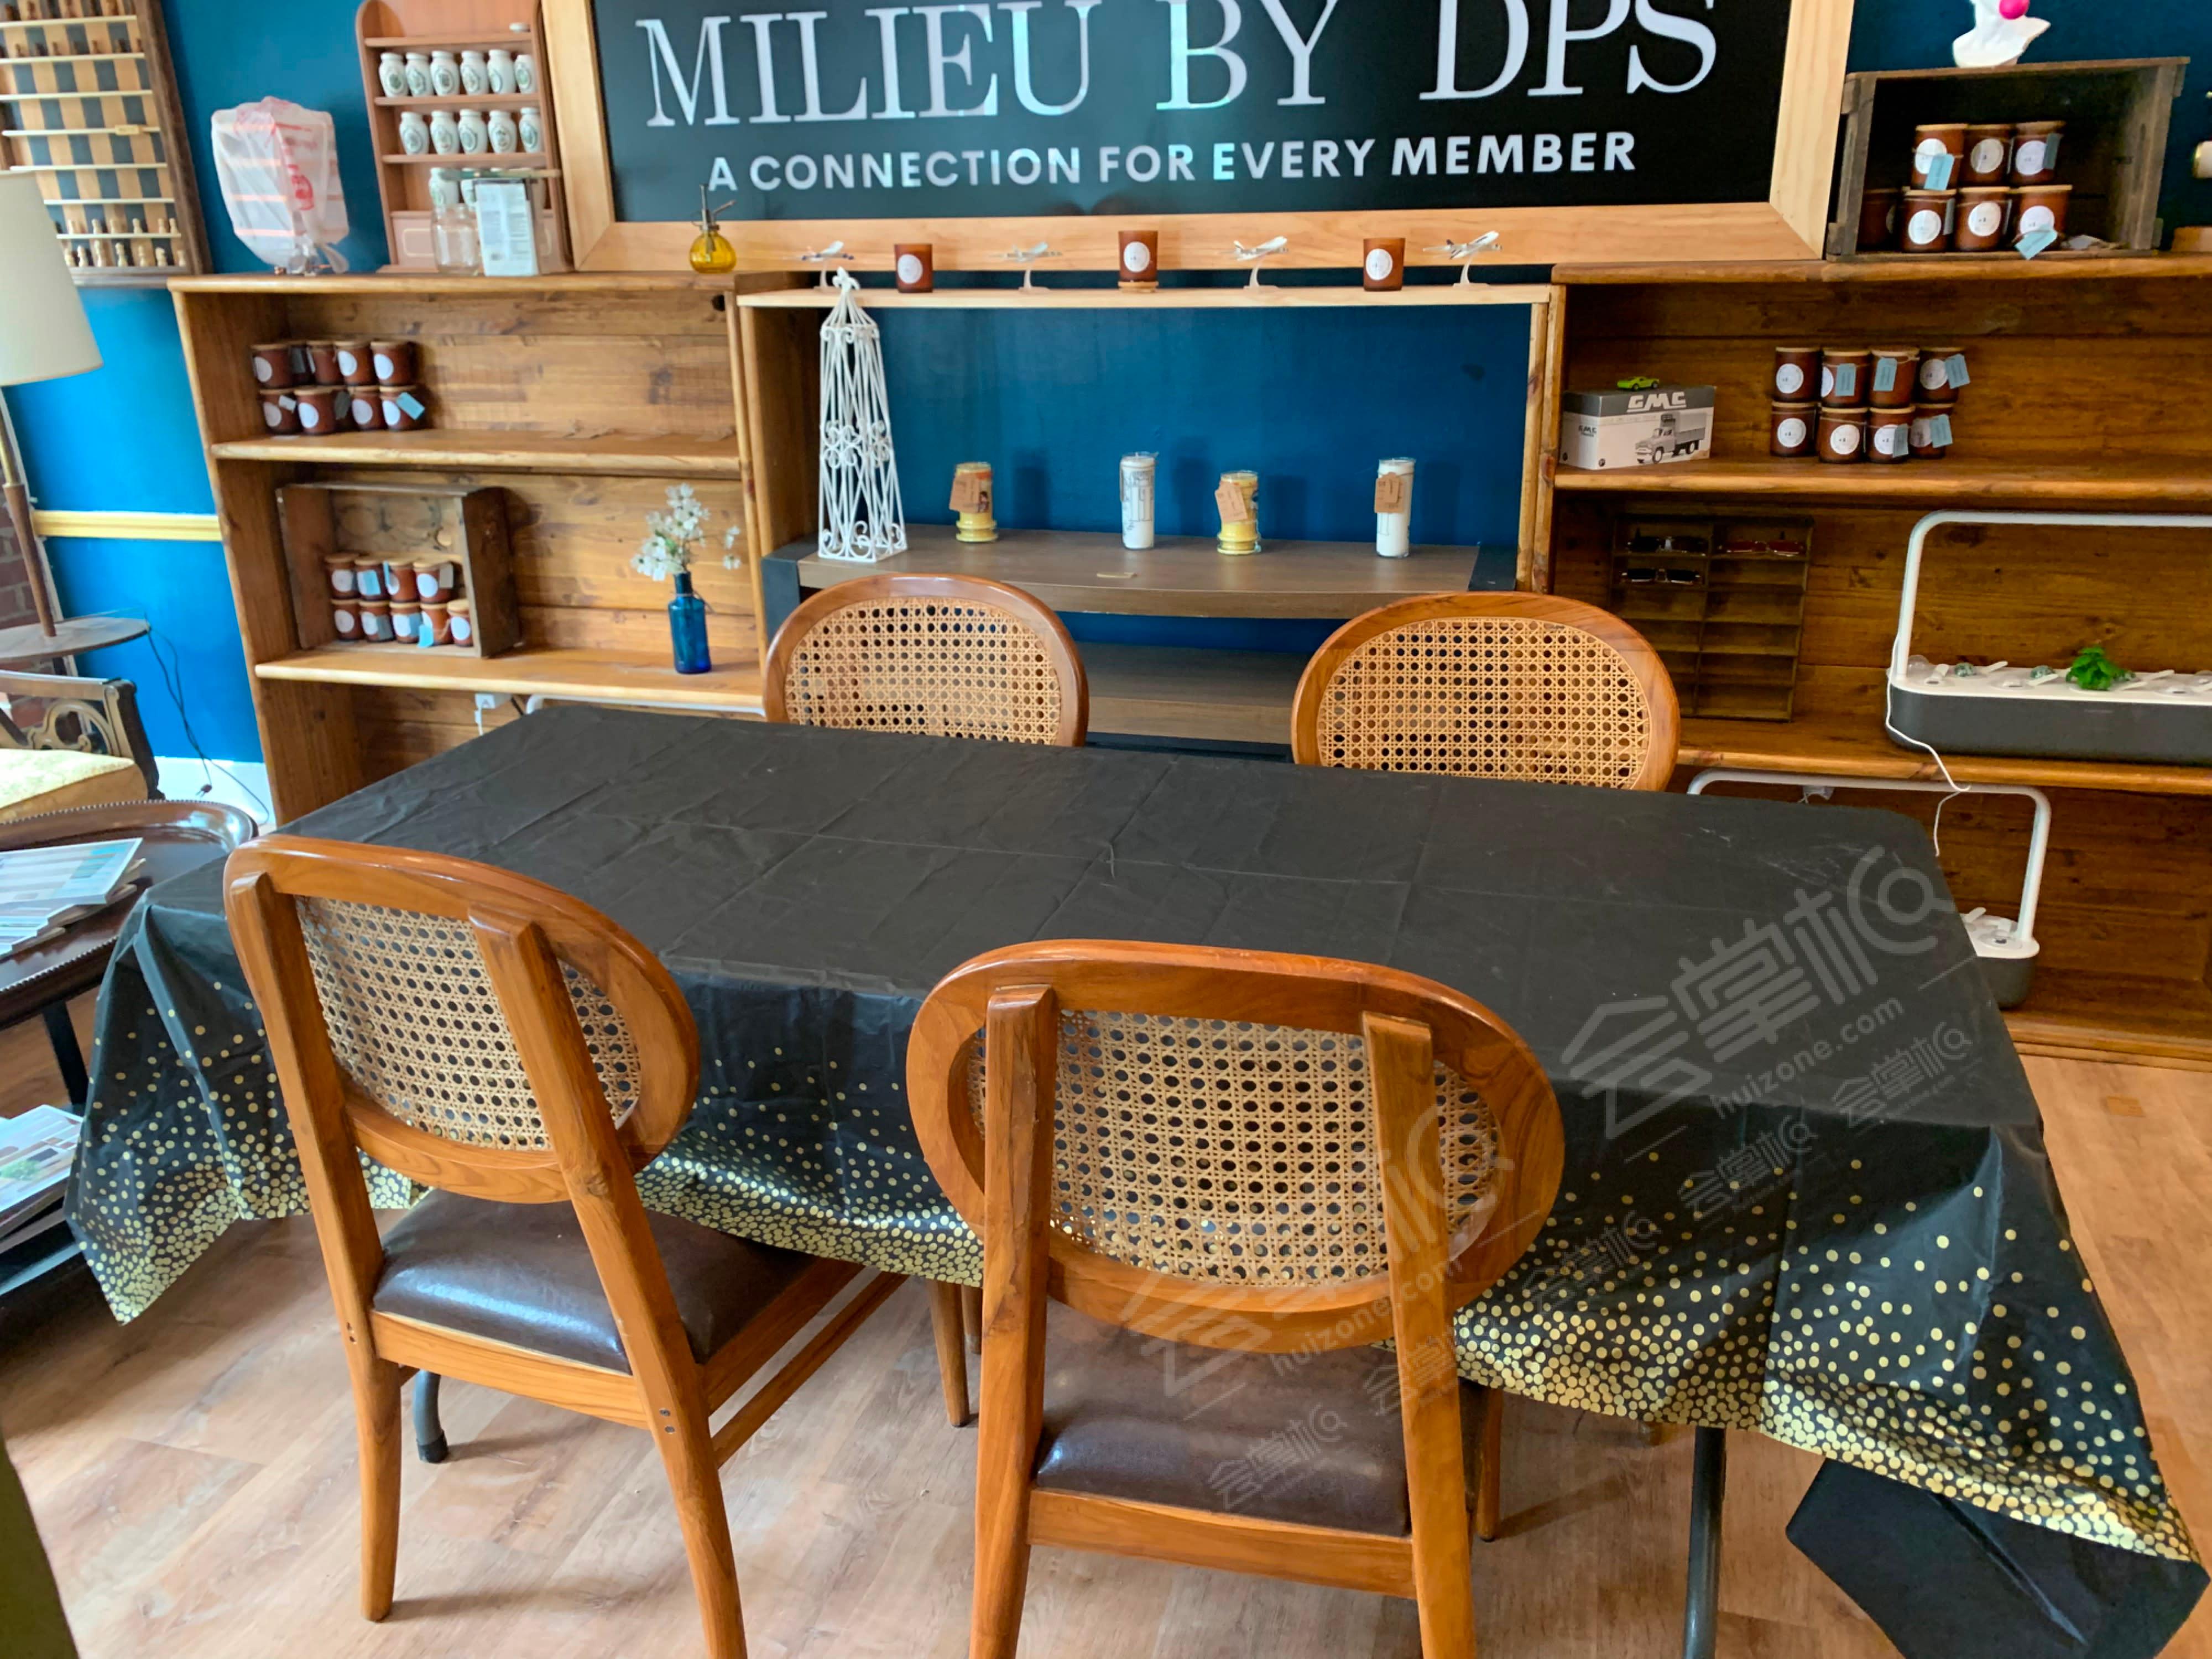 1970s Milieu by DPS